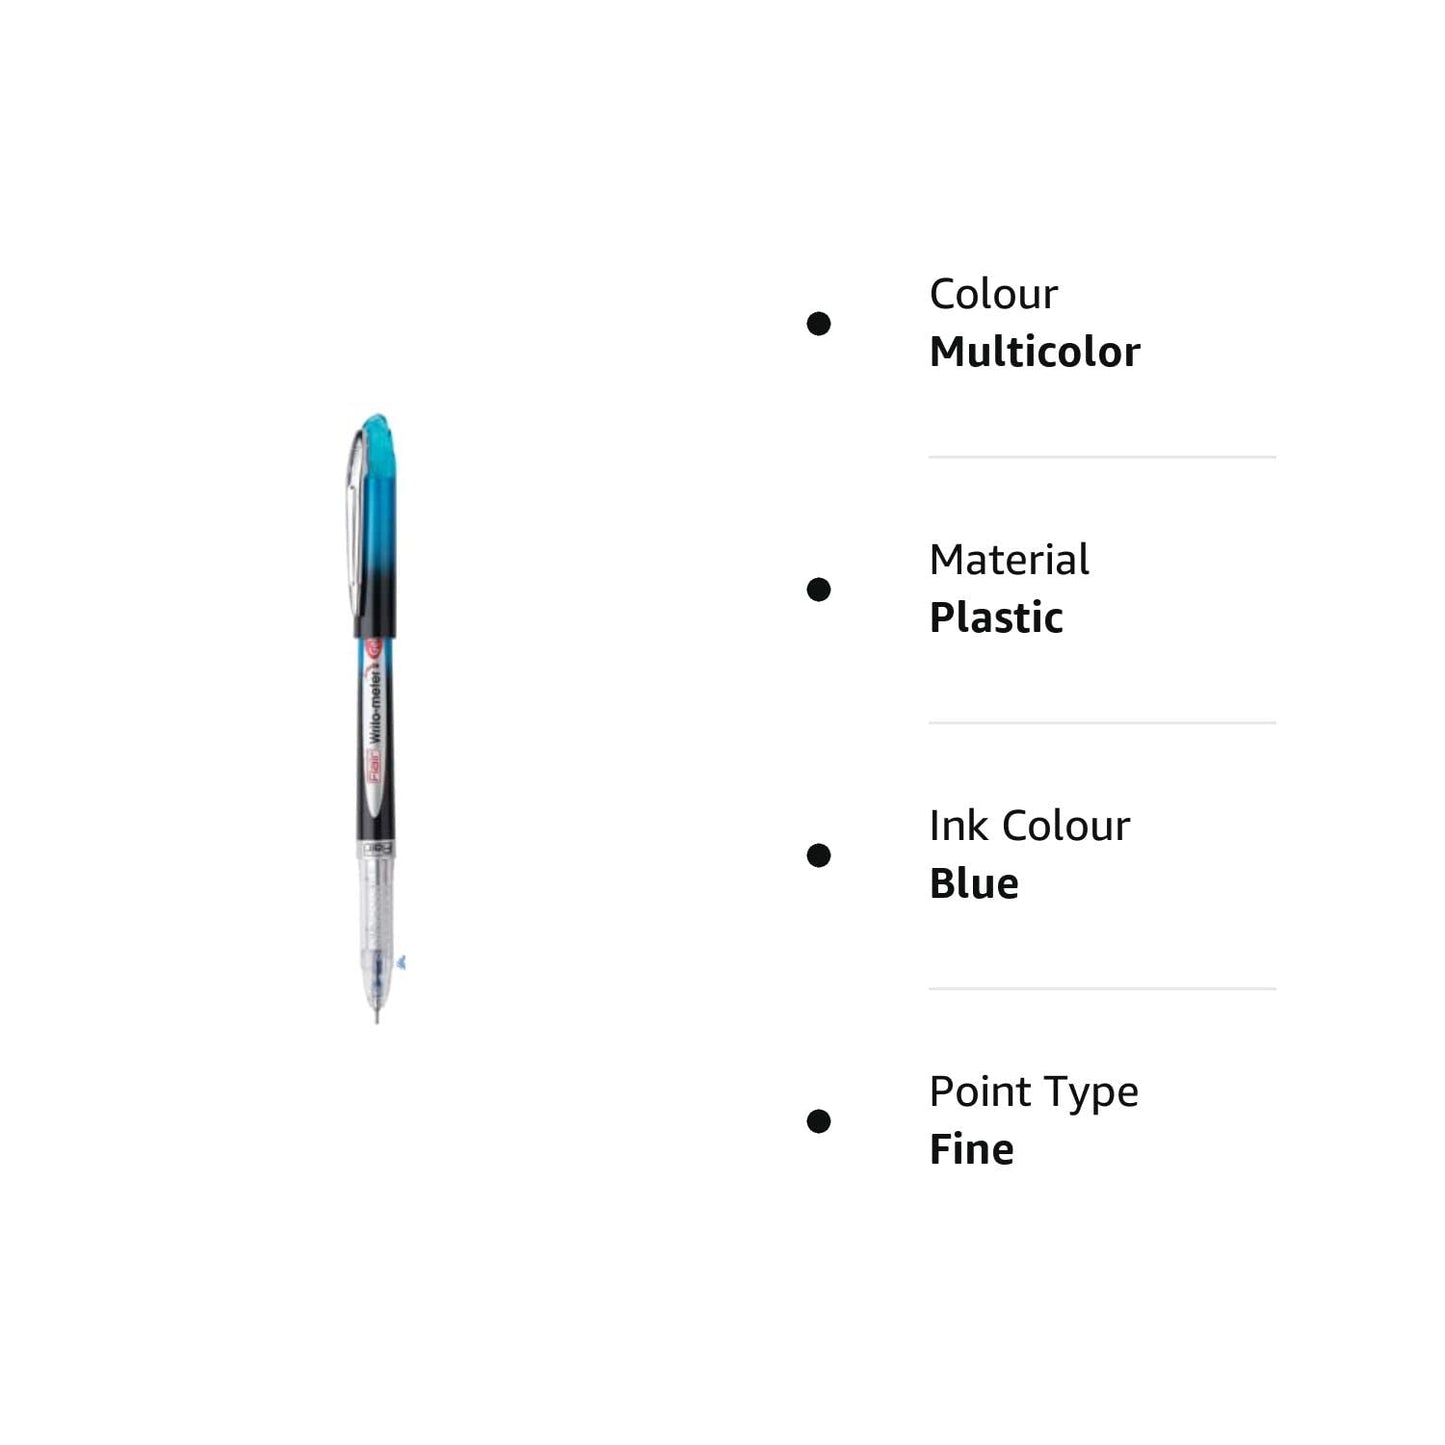 FLAIR Writometer Gel Pen Box Pack | Stainless Steel Tip | Our Longest Writing Pens | Writes Upto 1,200 Meters | Ensures Smoothness & Durability | Blue Ink, Pack of 1